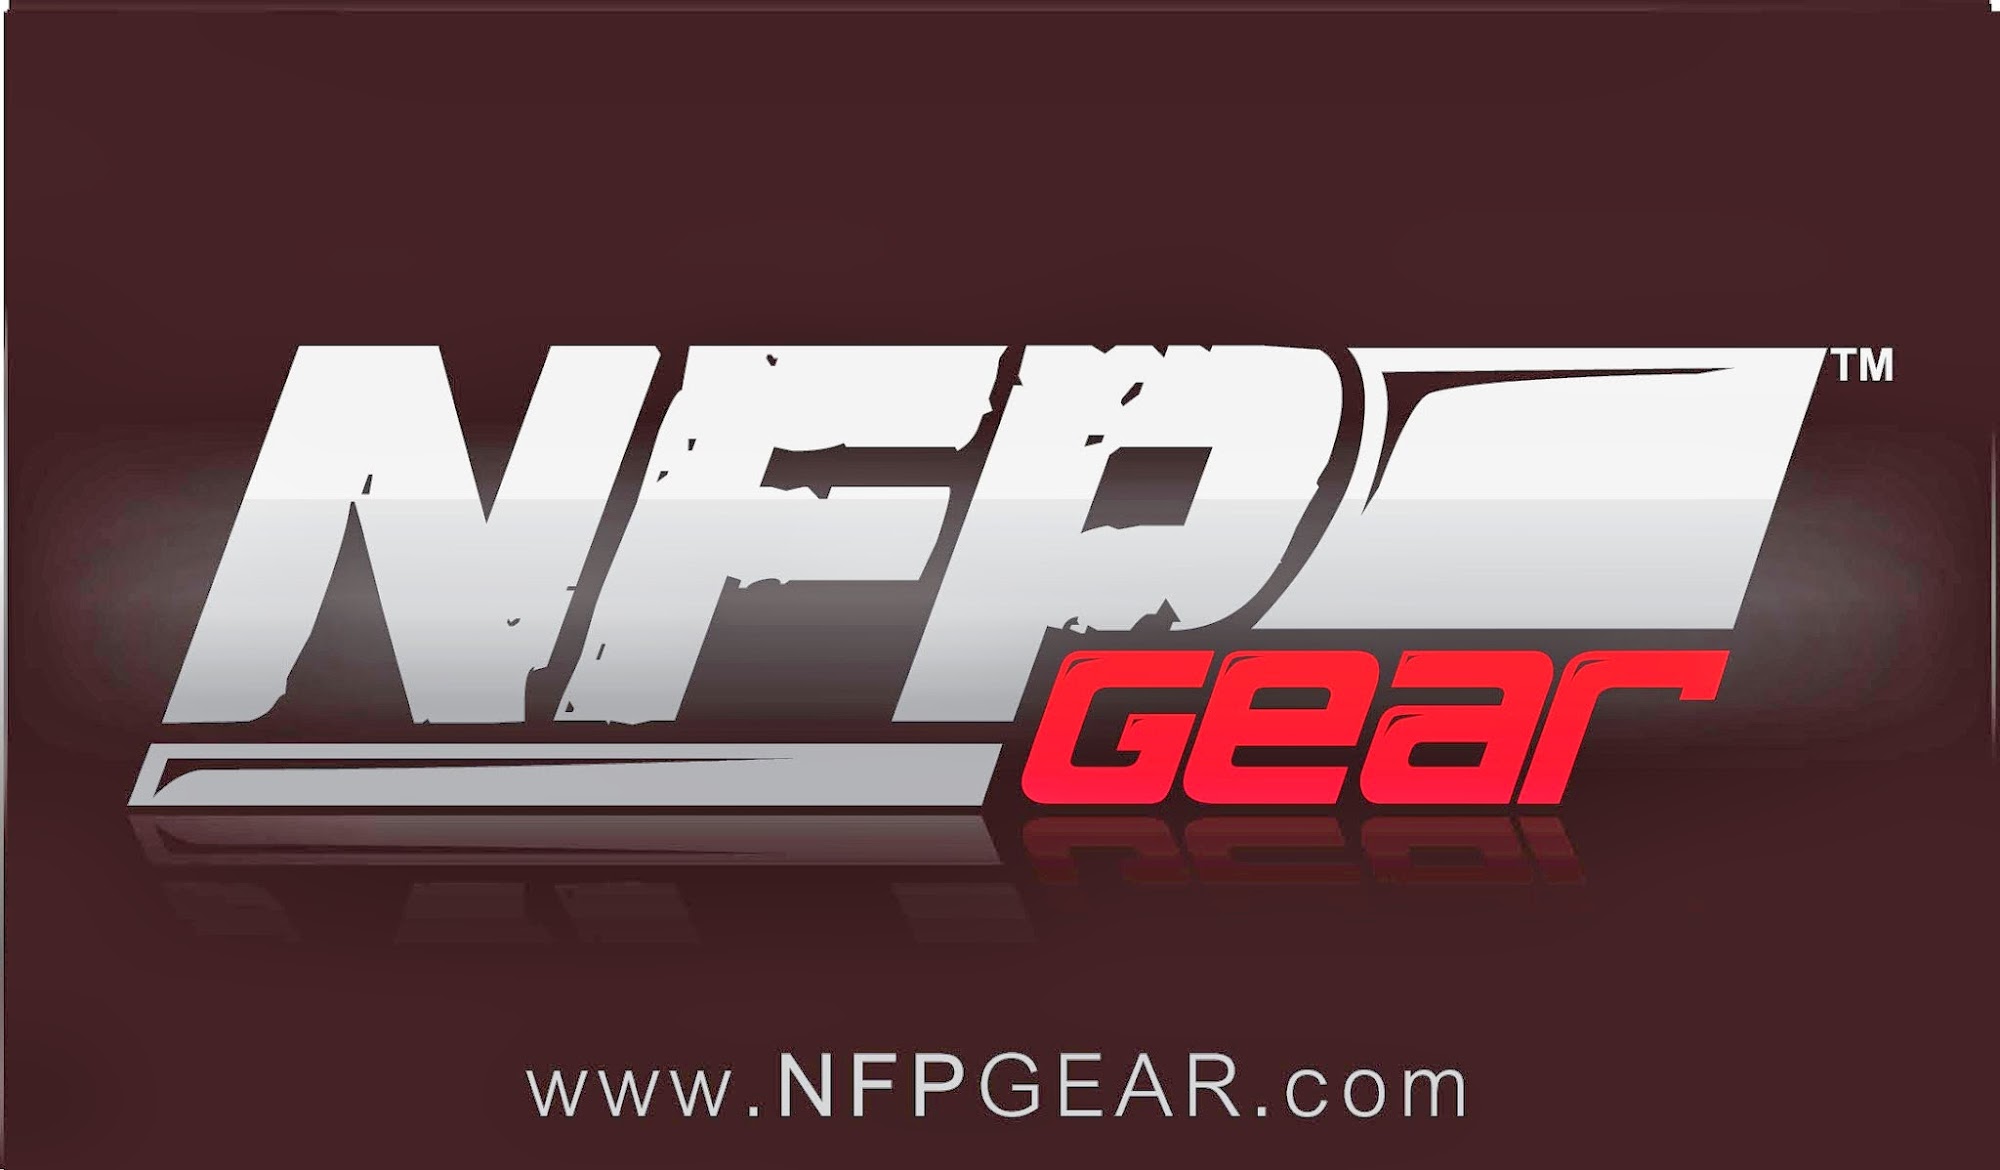 NFP Gear